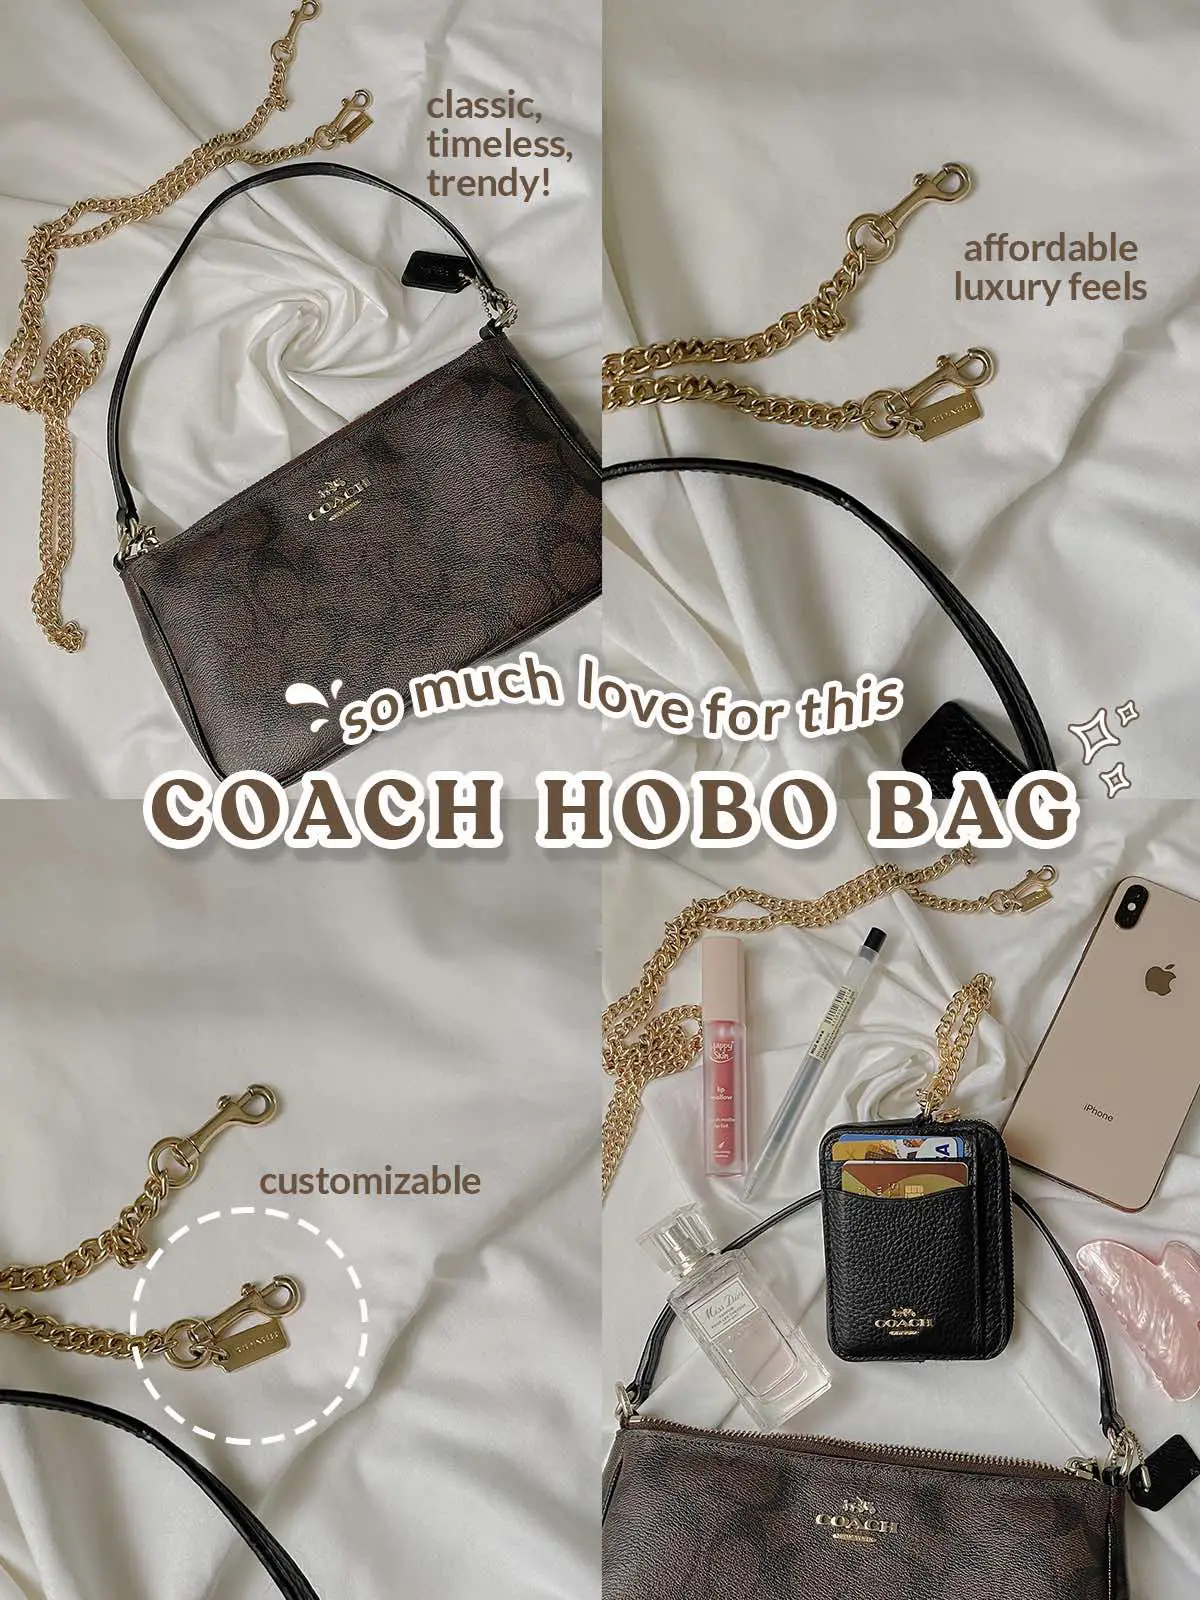 THIS HOBO BAG COMPLIMENTS ALL MY OUTFITS!, Gallery posted by Via Silverio